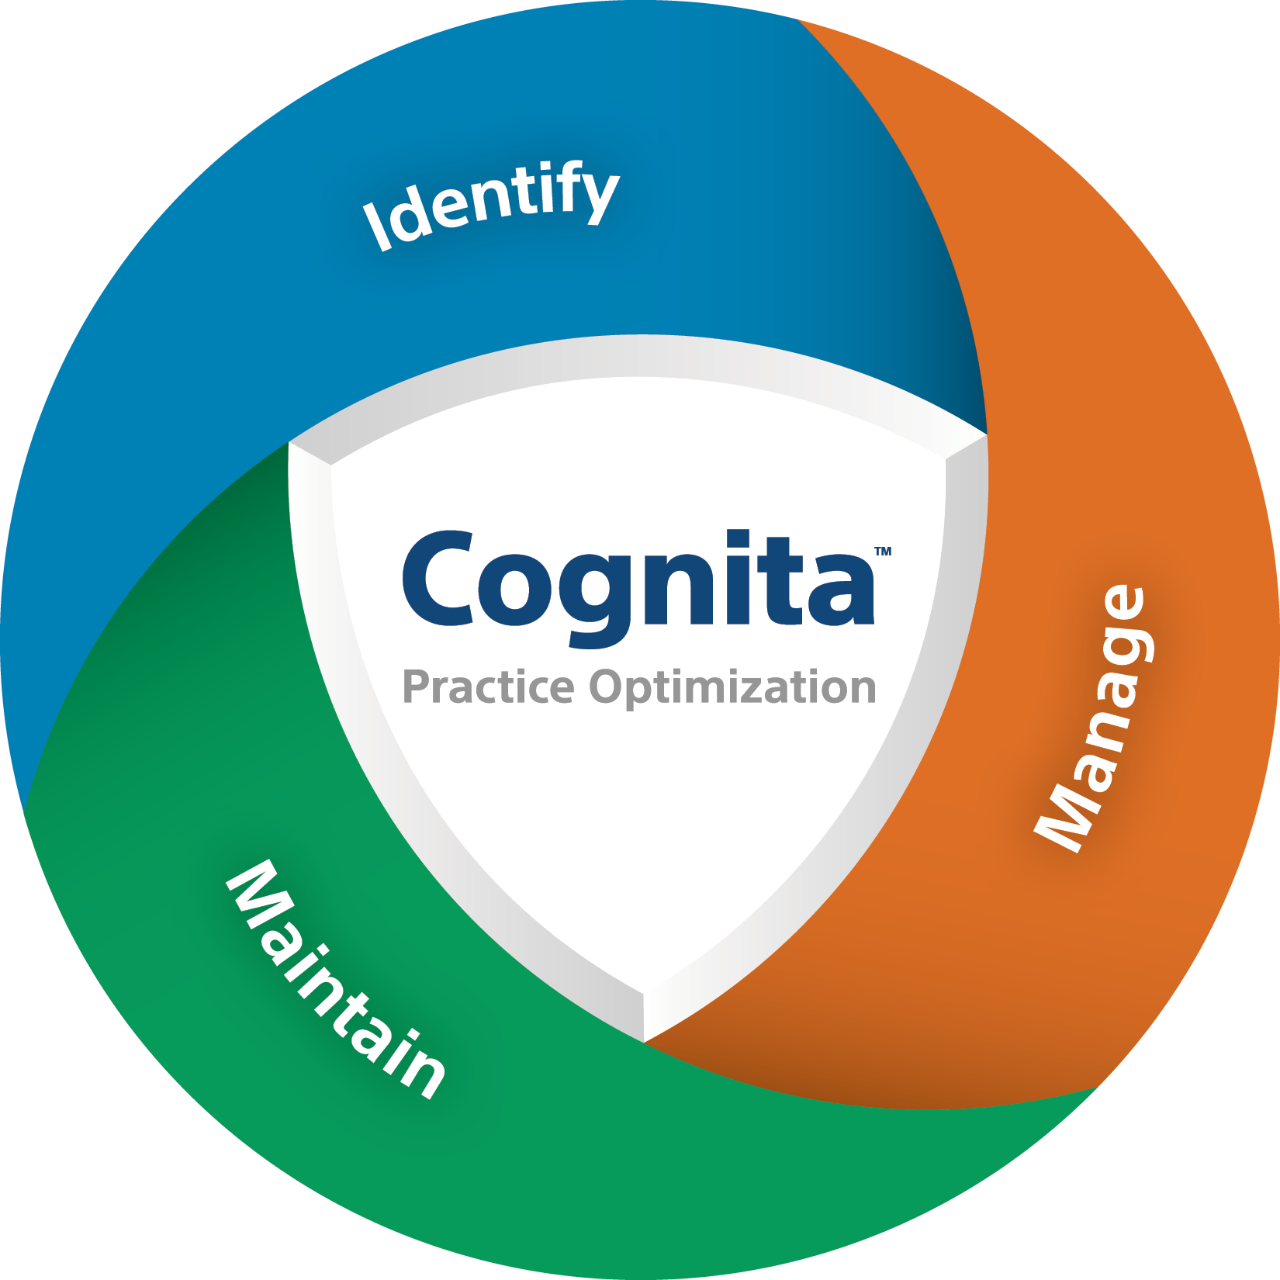 Cognita Practice Optimization in a circle with sections reading identify, manage and maintain.